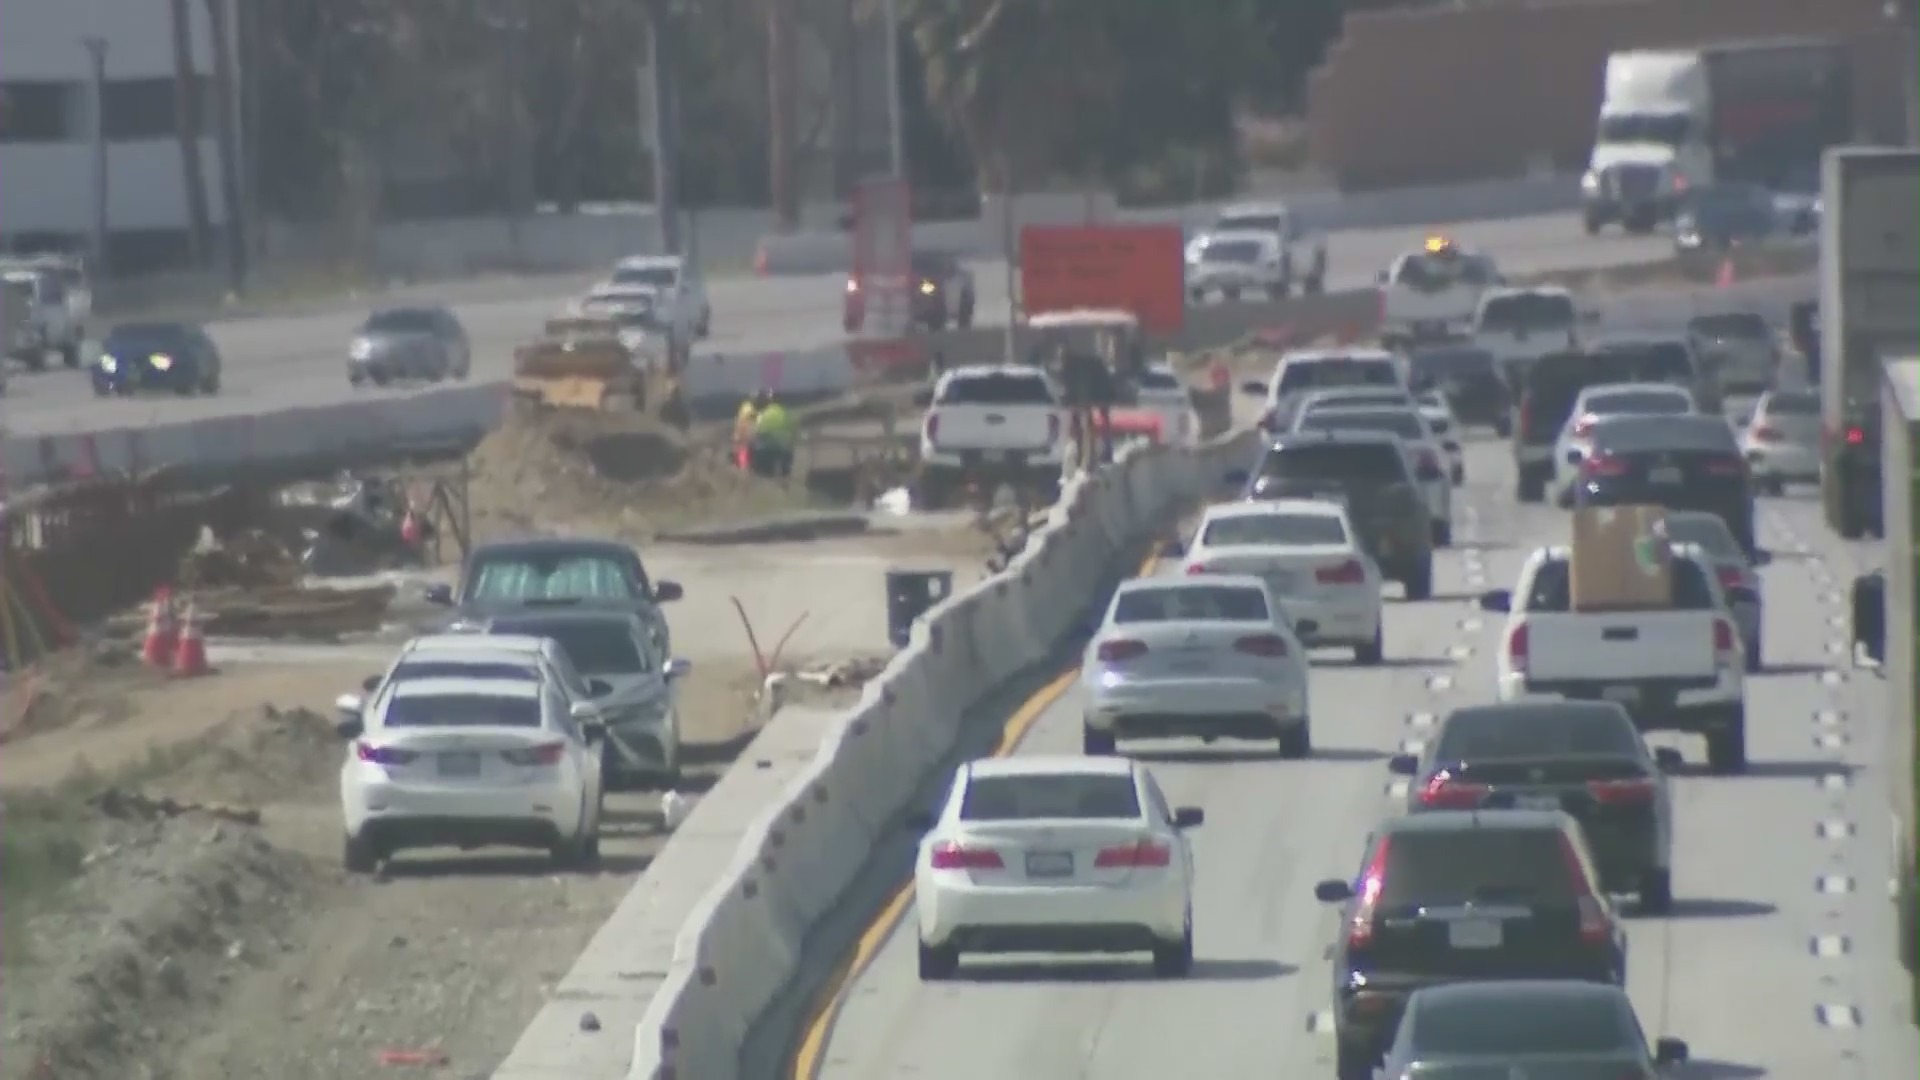 Construction on the 10 Freeway in the Inland Empire is frustrating some drivers. (KTLA)